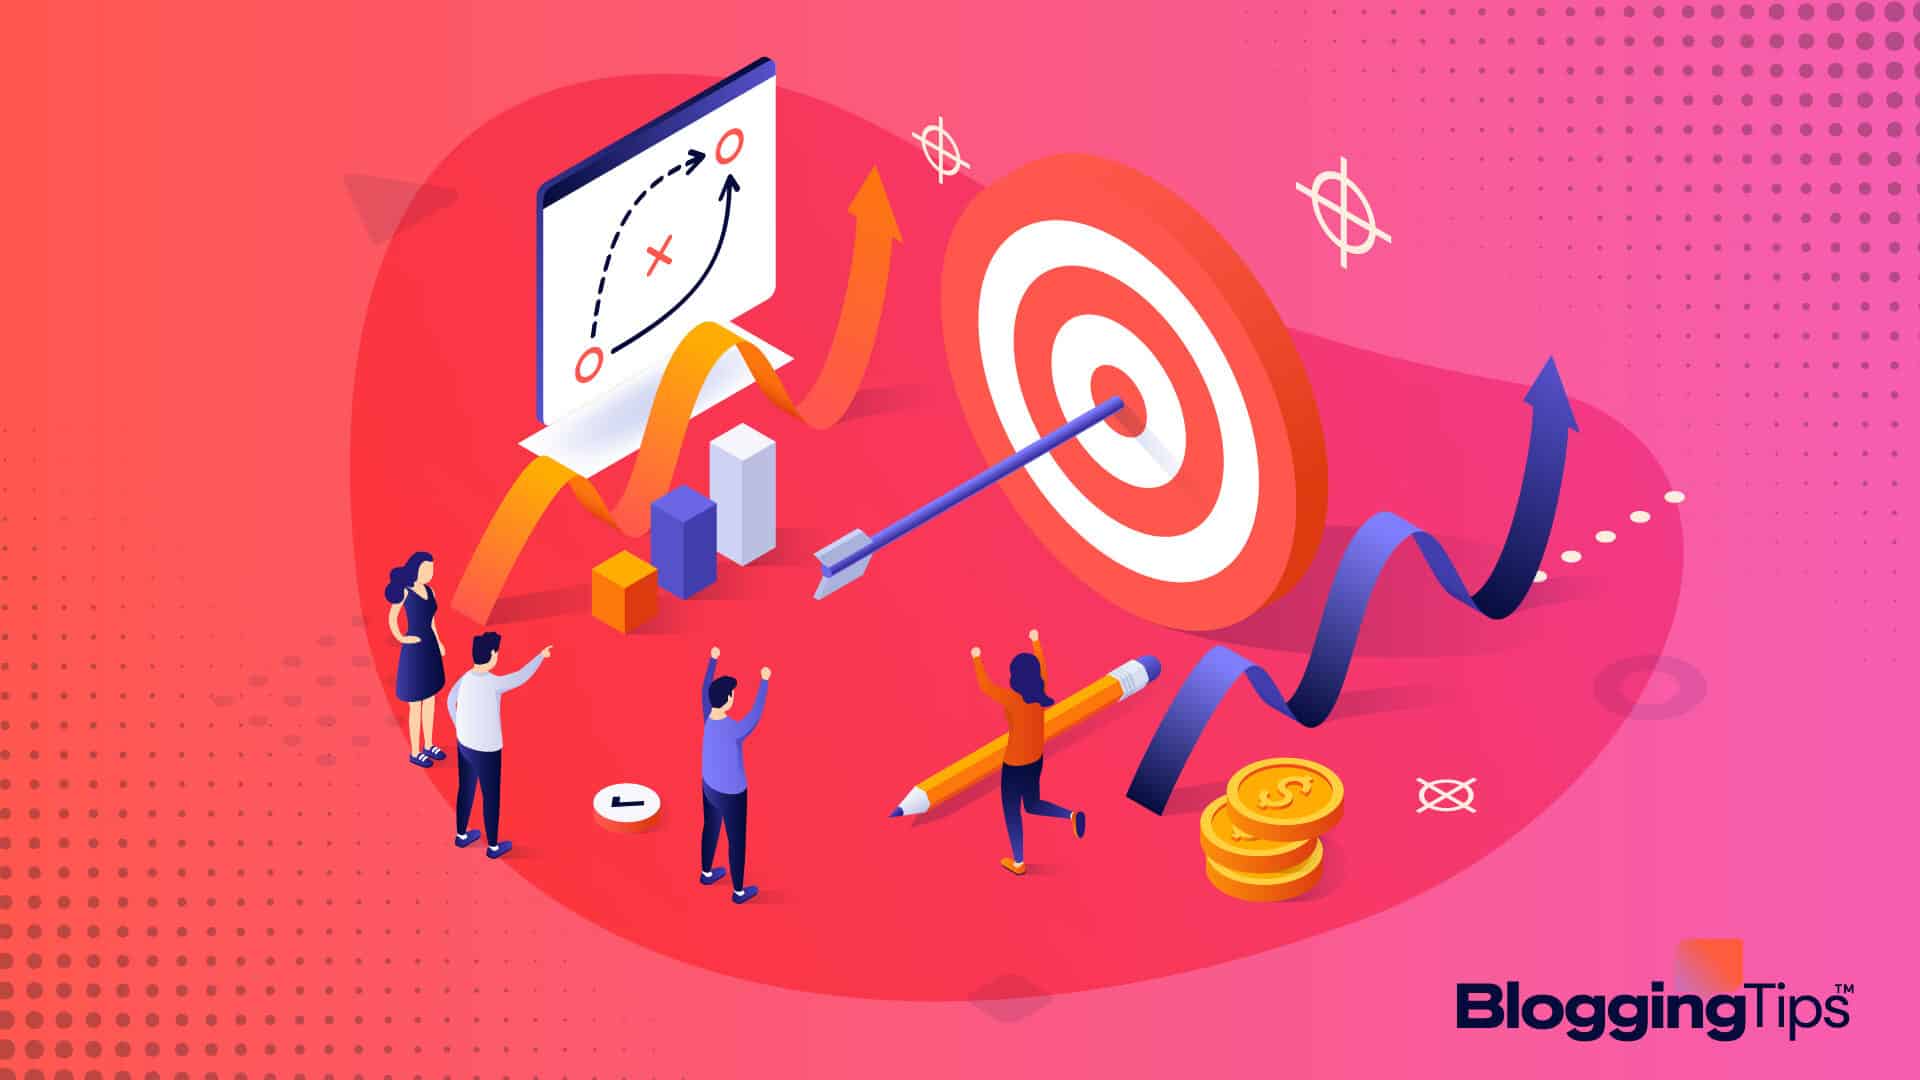 vector graphic showing an illustration of people trying to get to the bulls eye through niche strategy